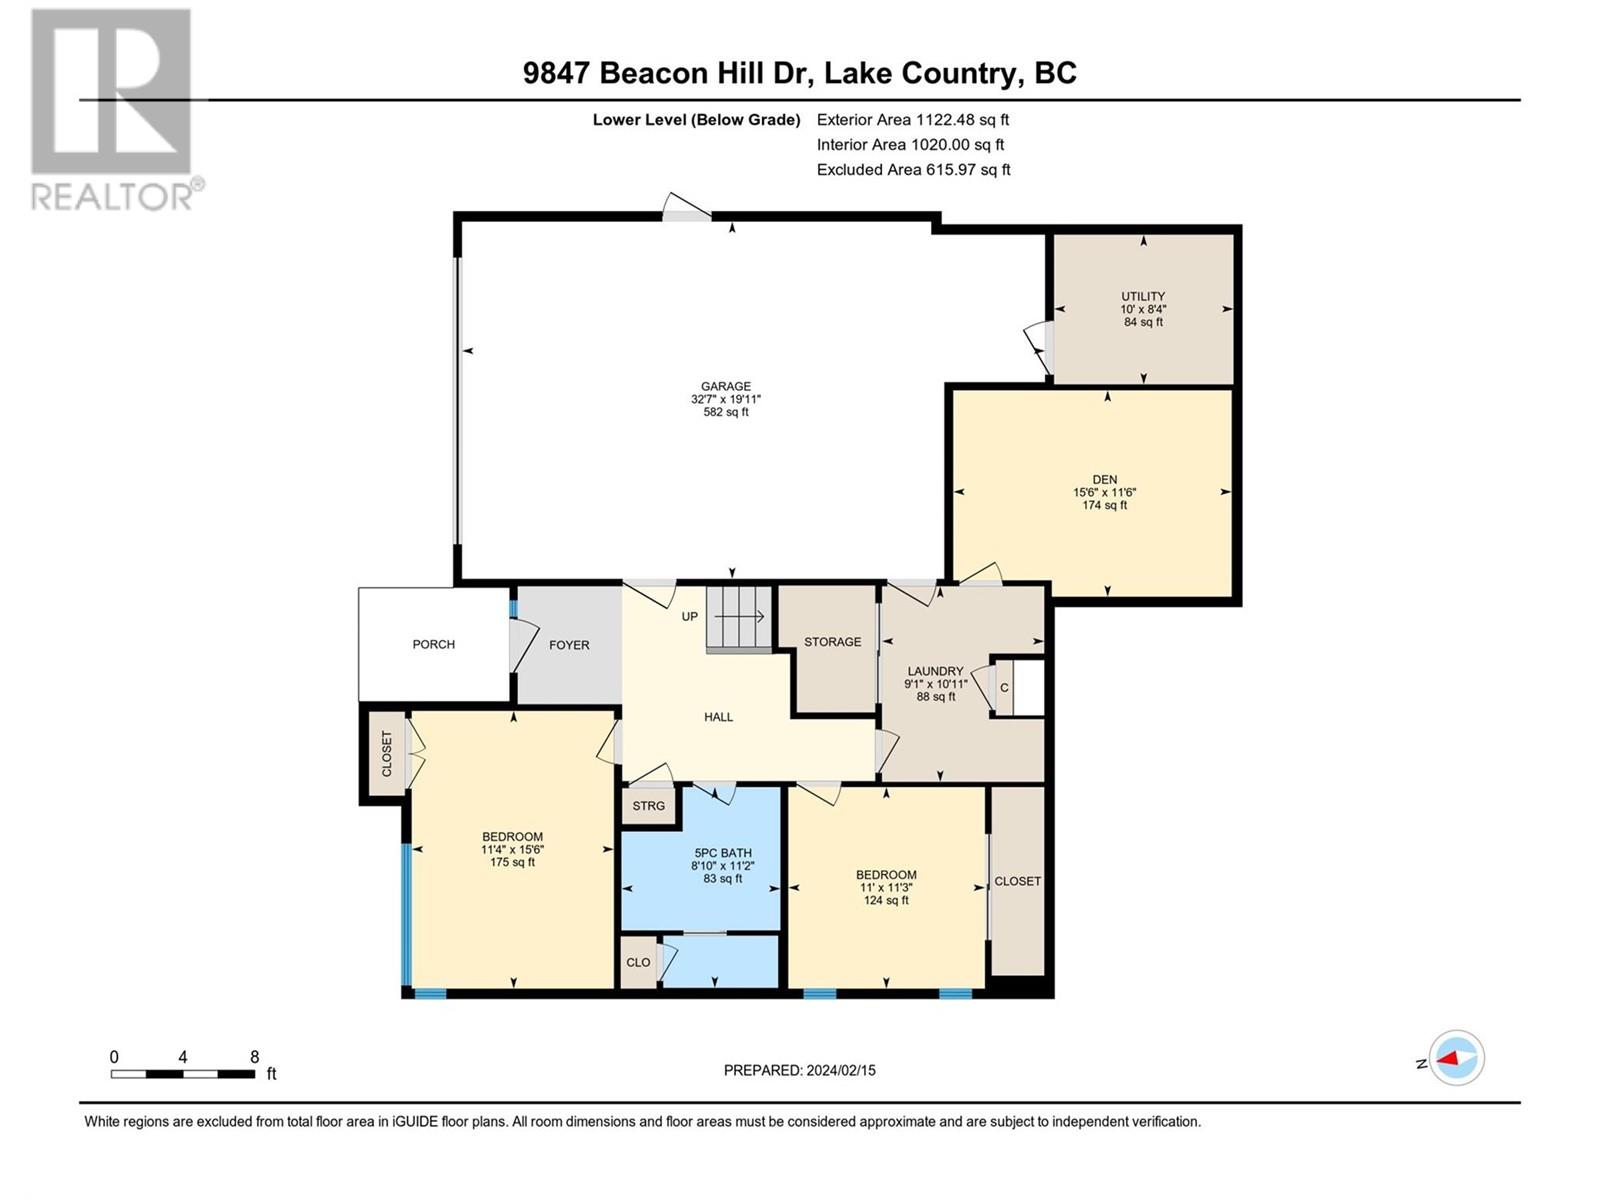  9847 Beacon Hill Drive, Lake Country